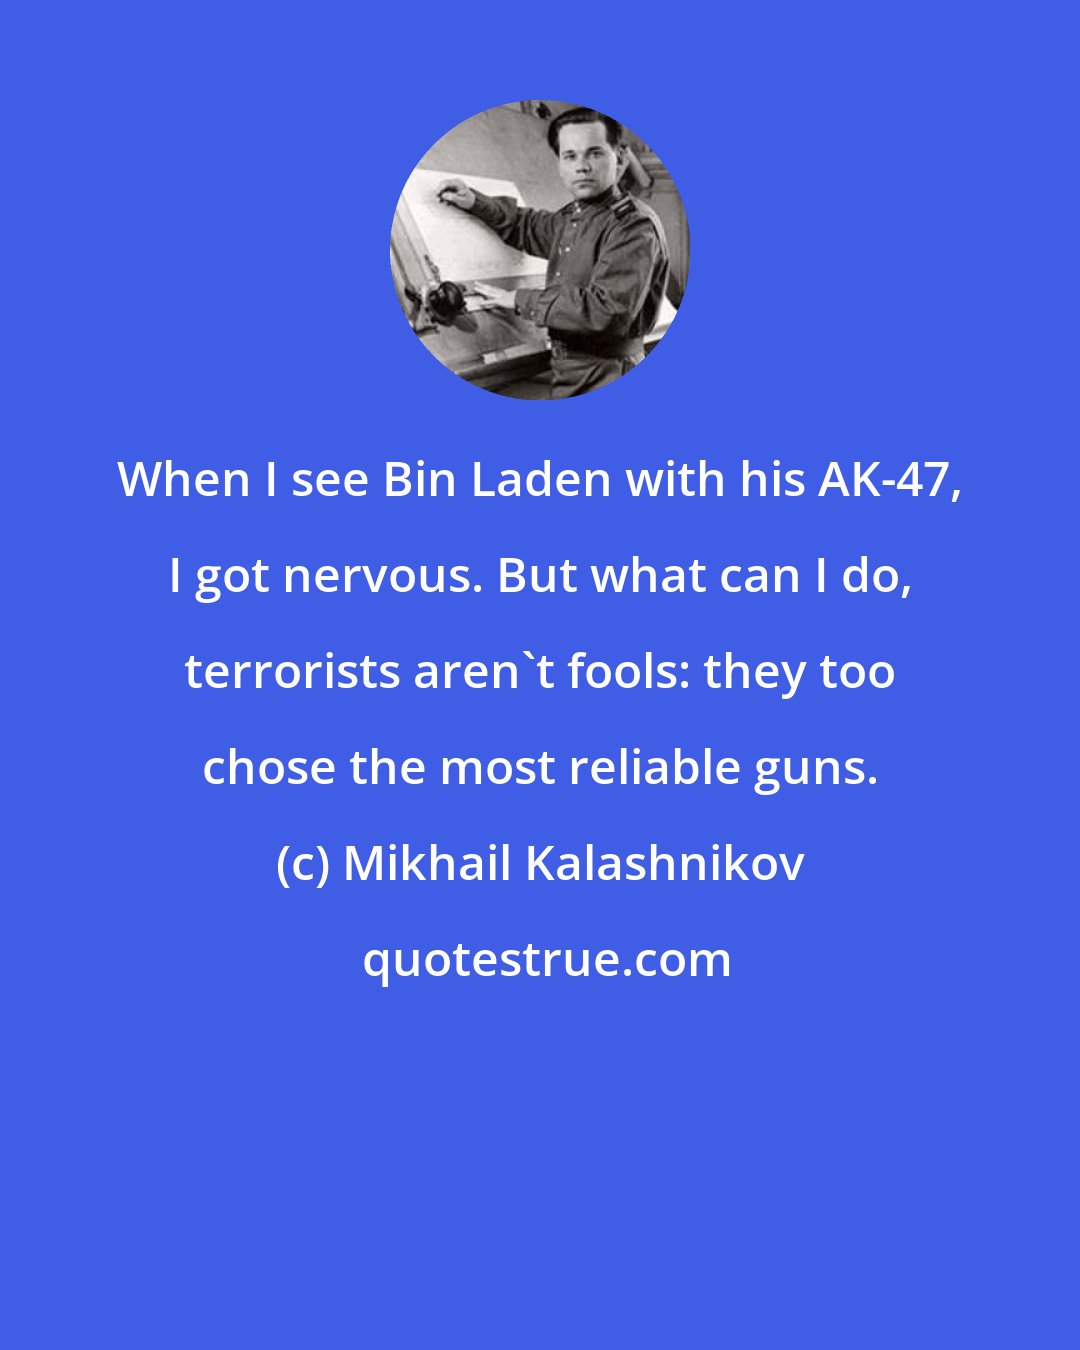 Mikhail Kalashnikov: When I see Bin Laden with his AK-47, I got nervous. But what can I do, terrorists aren't fools: they too chose the most reliable guns.